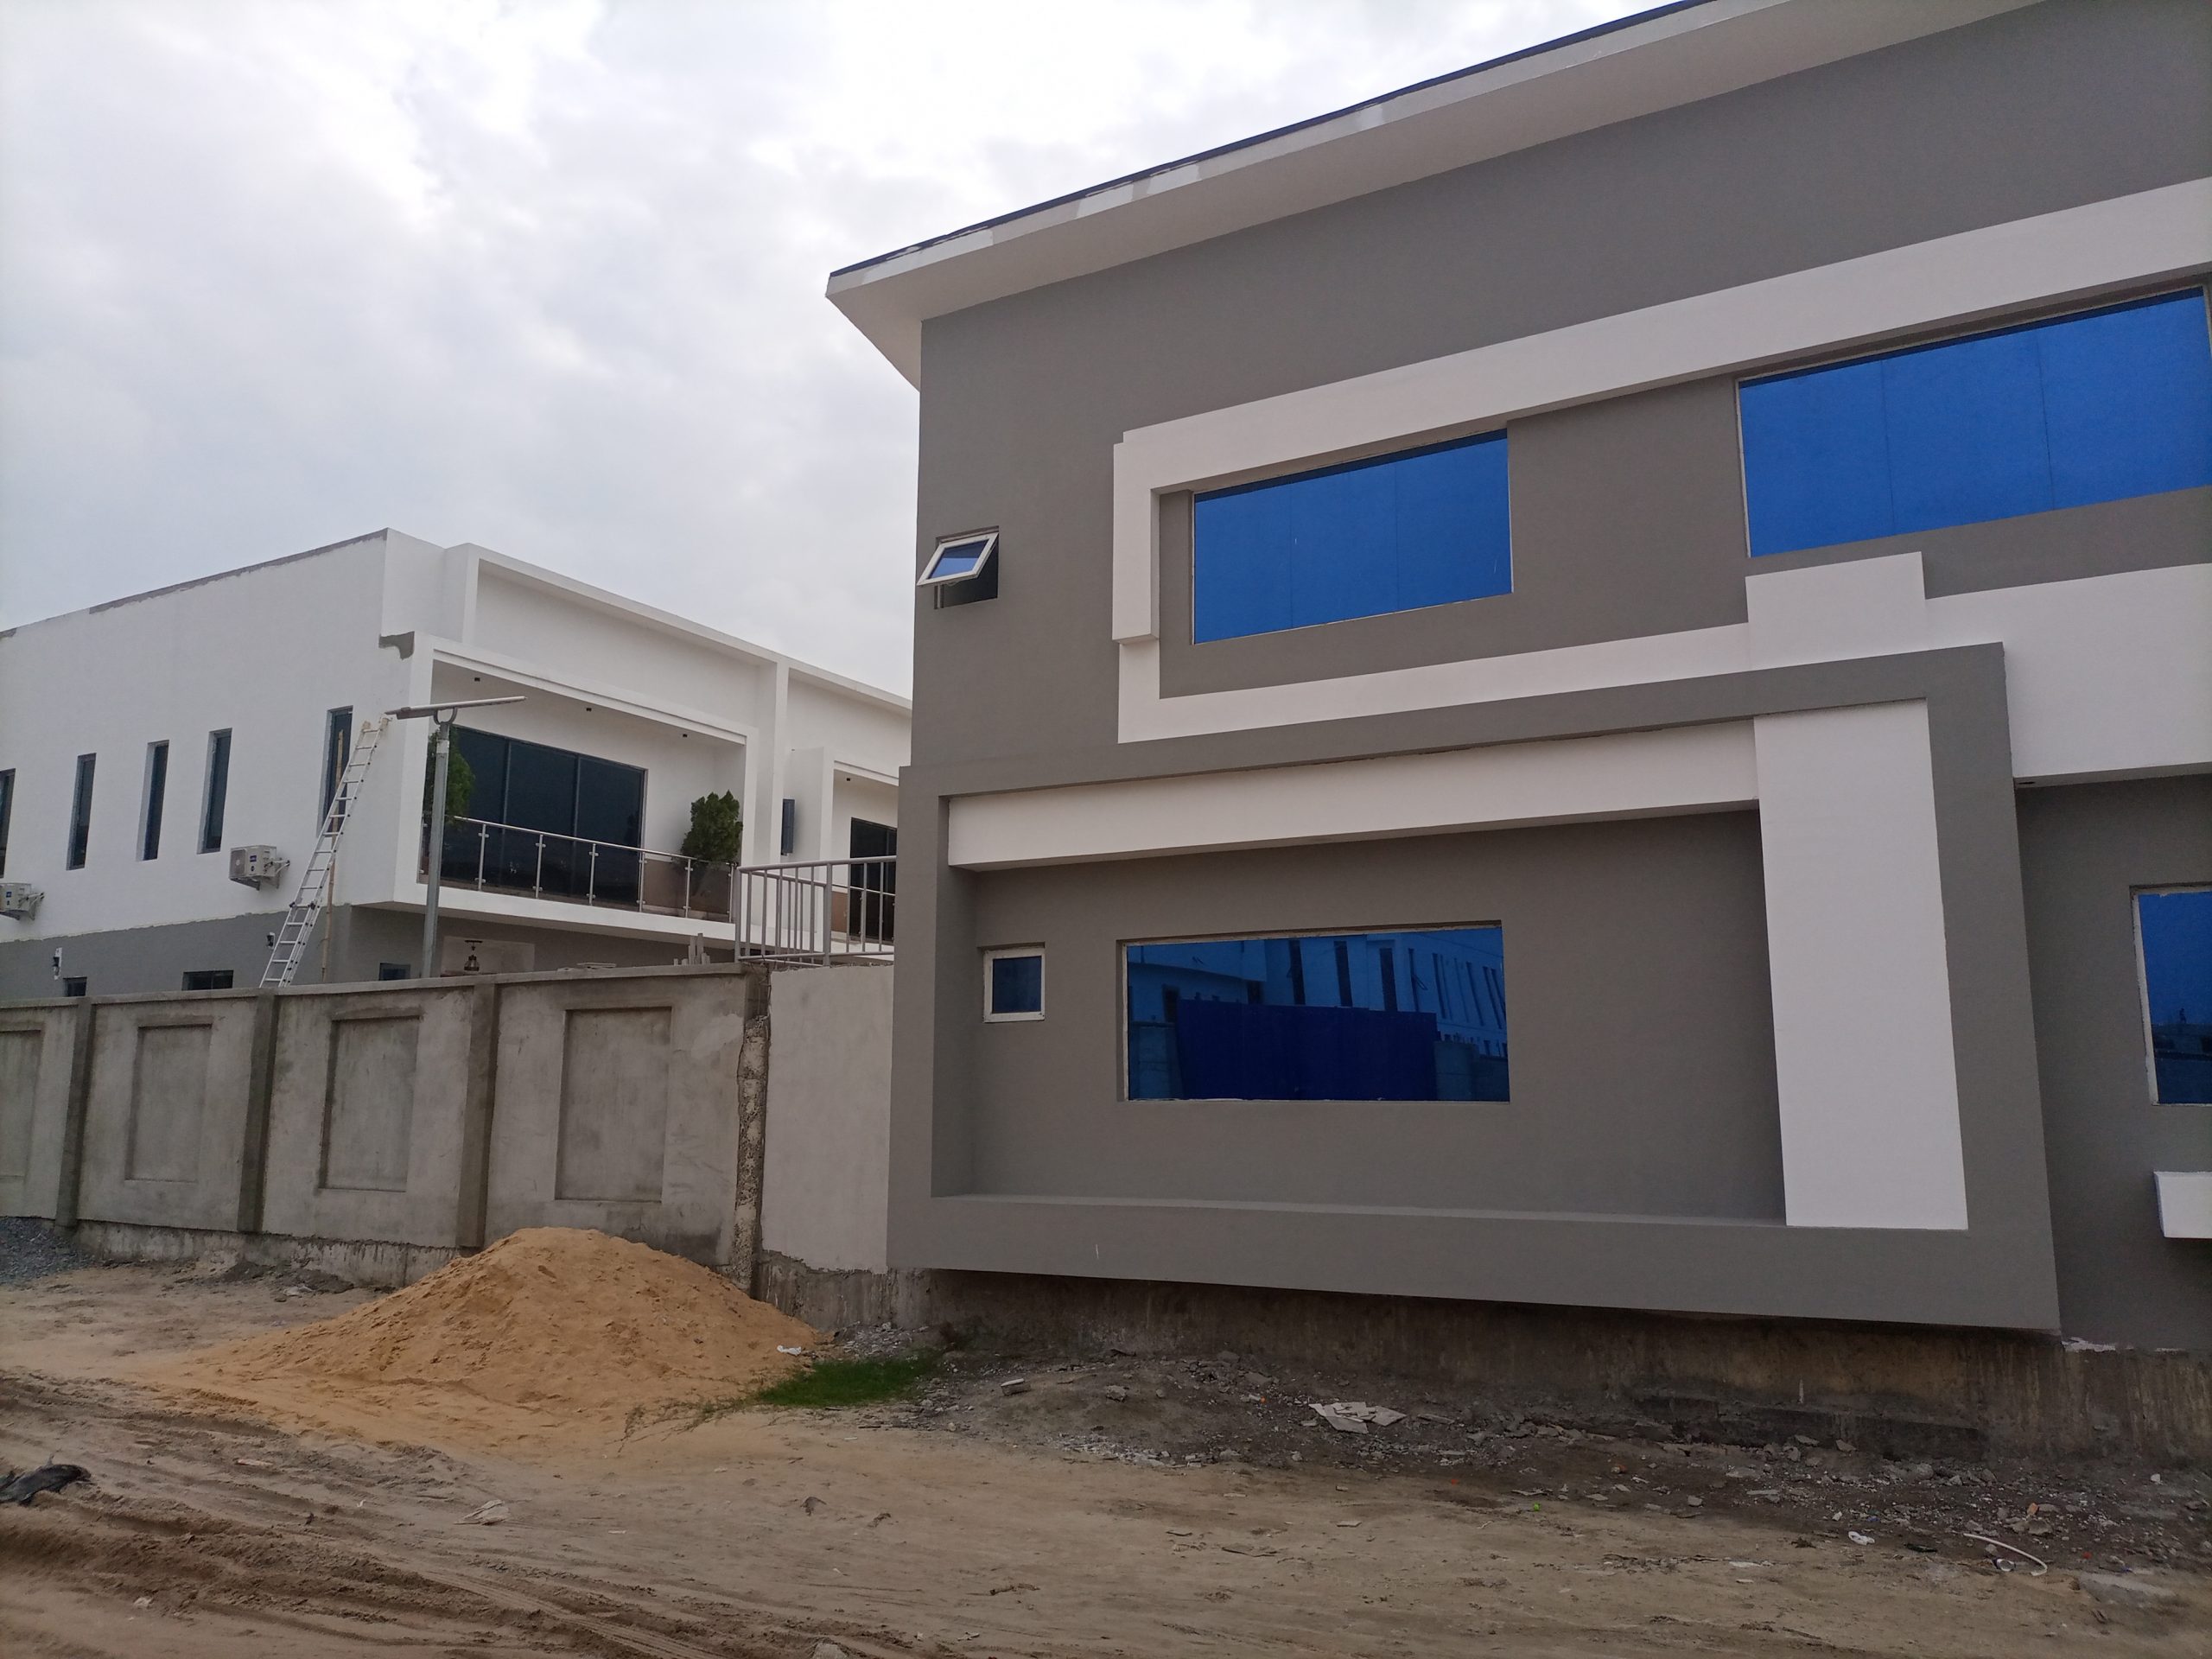 2 and 4 bedroom duplex with BQ for sale at Ambiance Estate, Ajah with installment payment